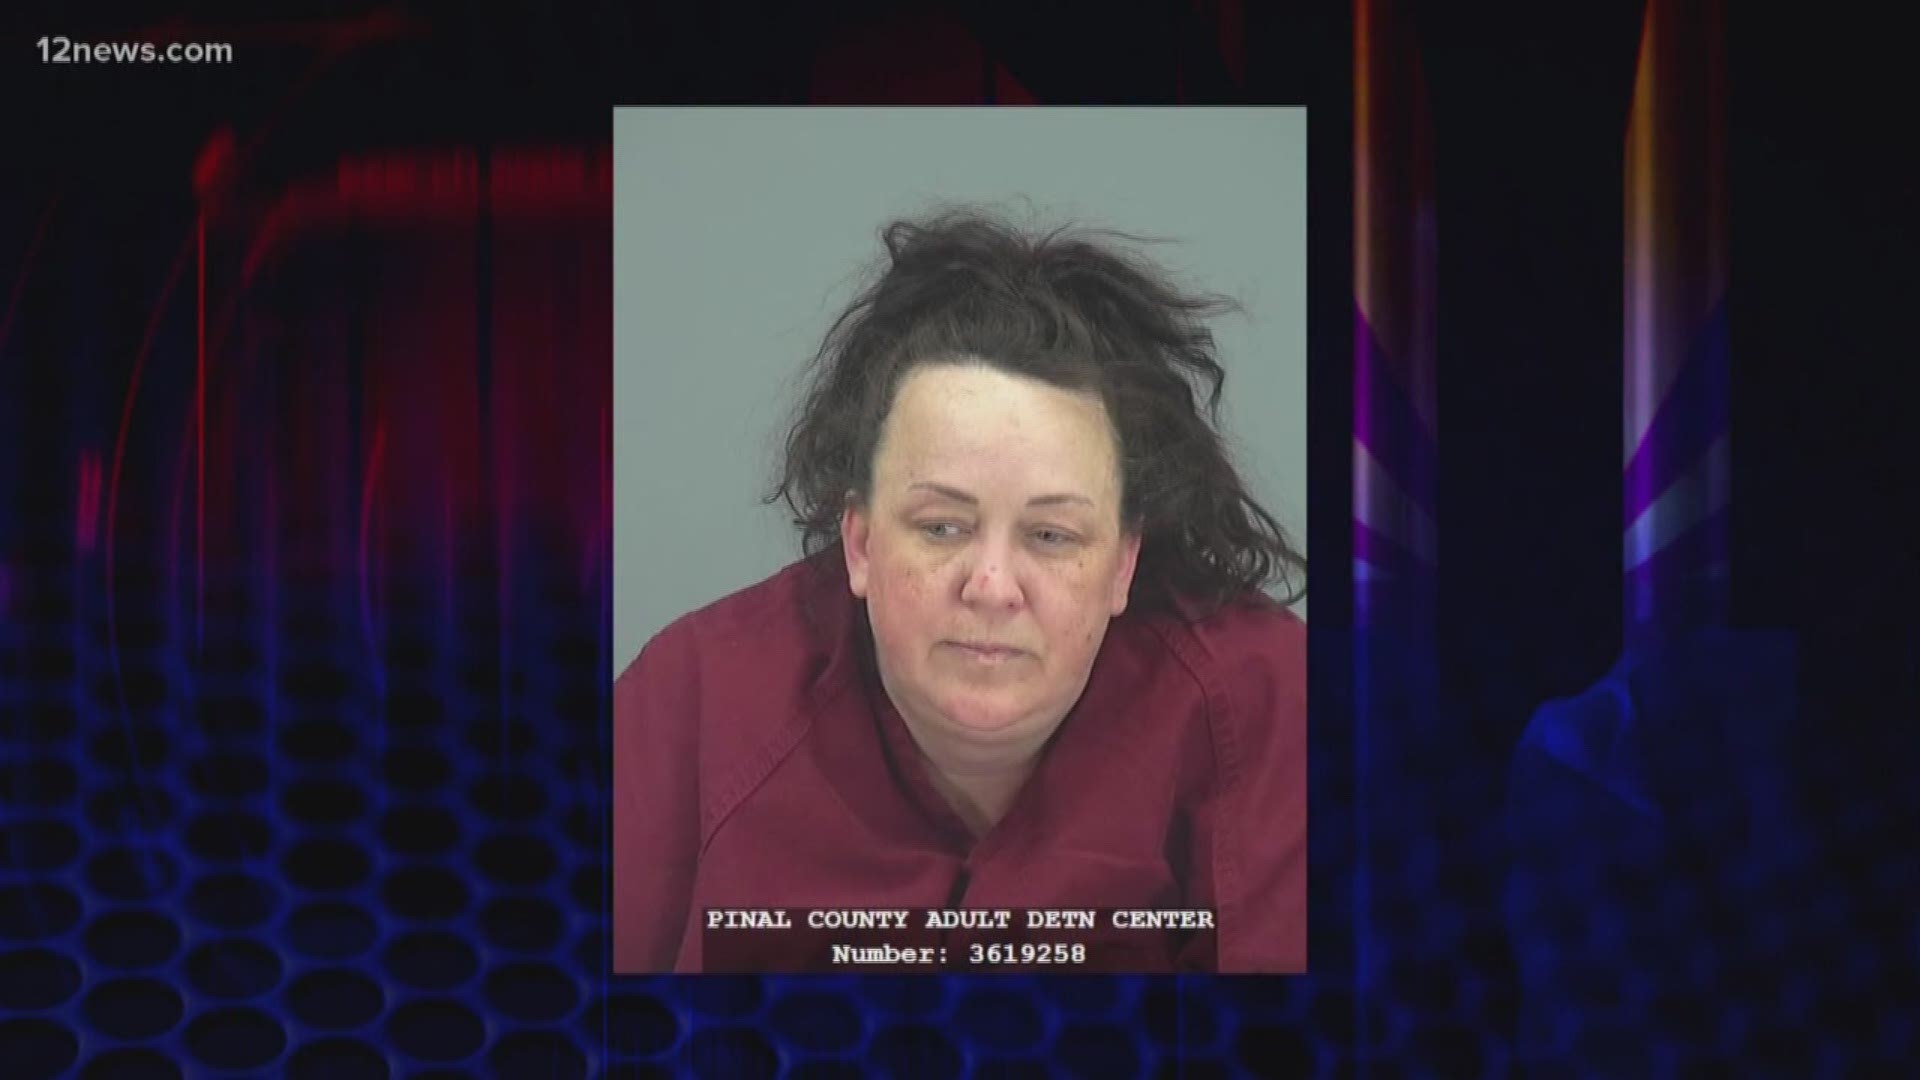 An Arizona woman accused of abusing her adoptive children and forcing them to participate in her YouTube account was indicted by a grand jury Monday, the Pinal County Attorney’s Office says.